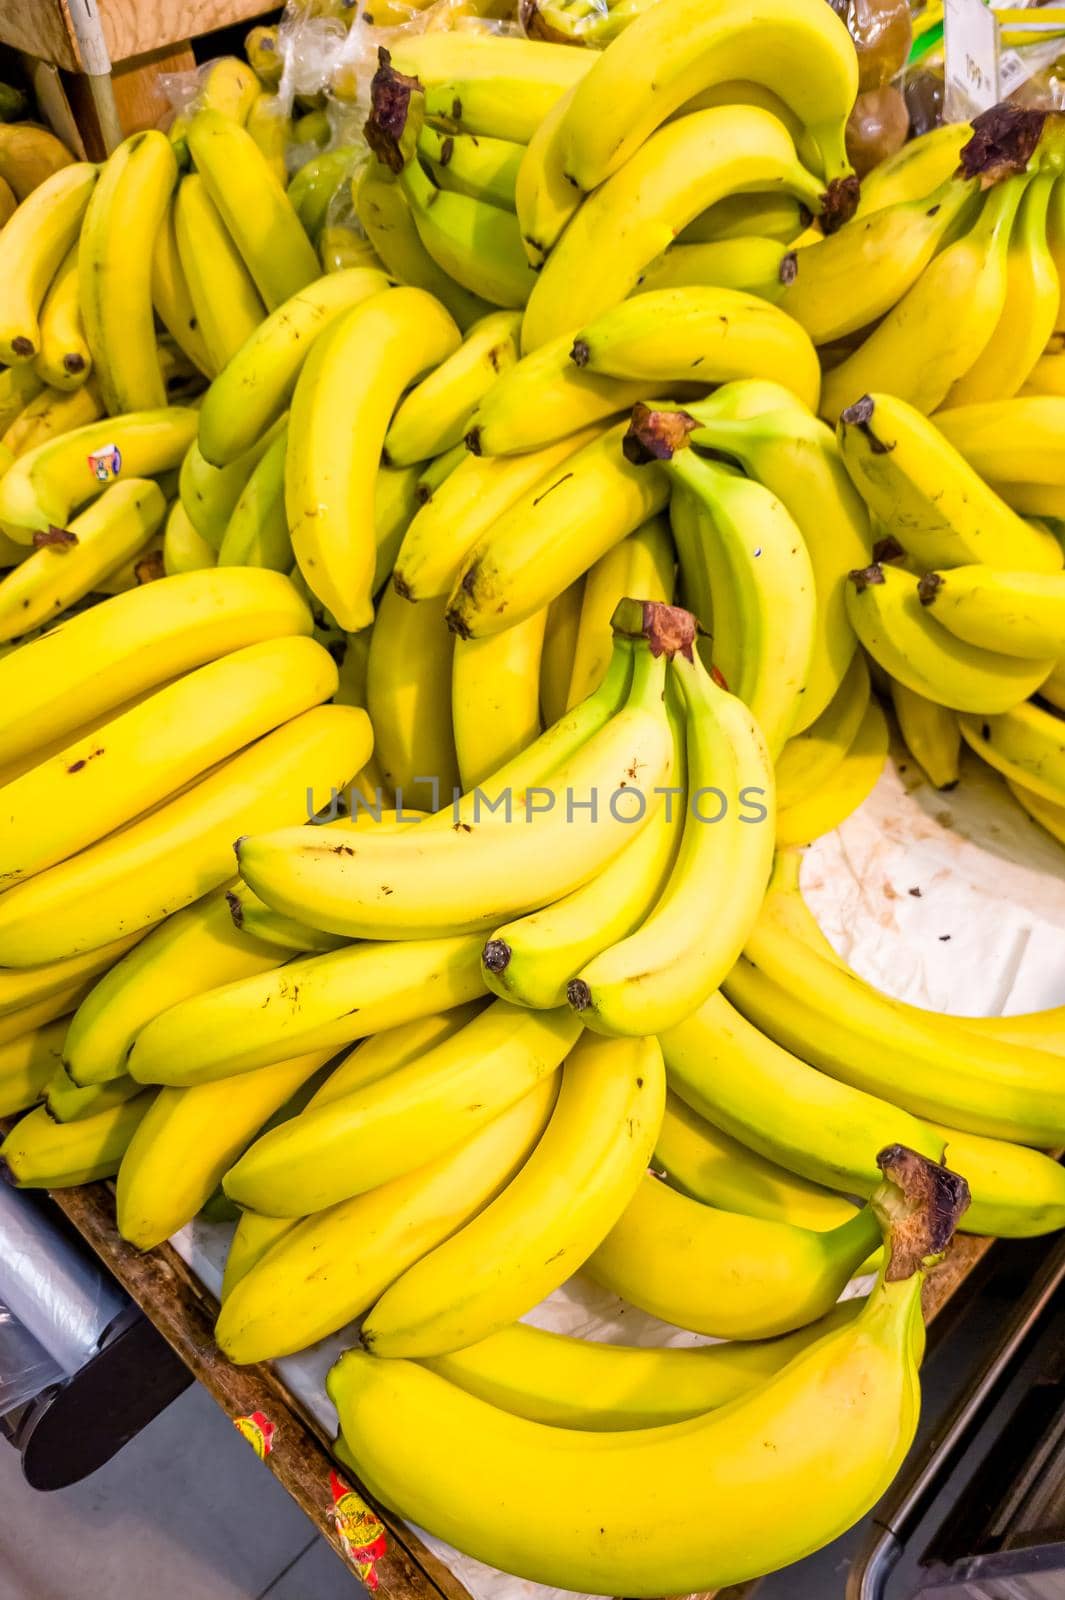 Yellow bananas are on the shelf of the store.